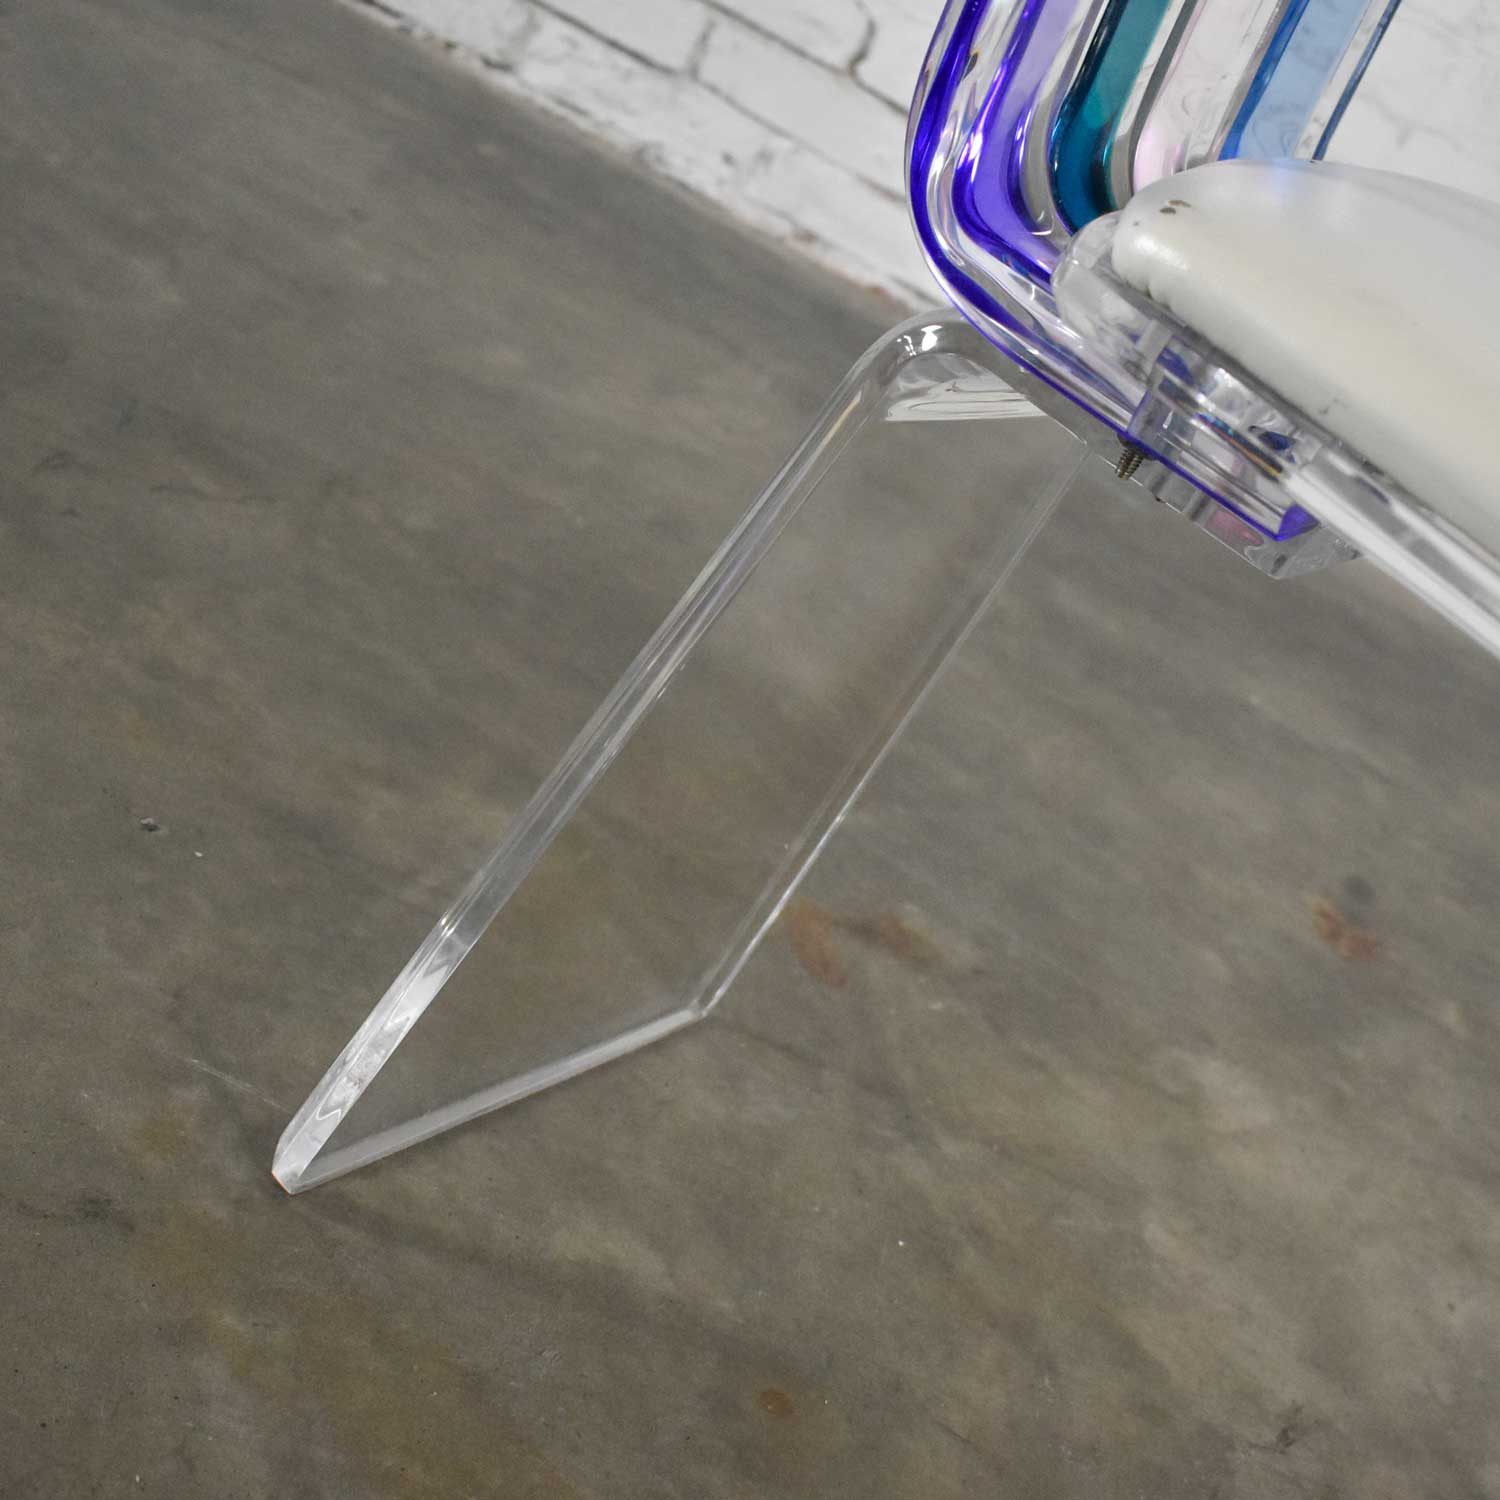 Modern Lucite Chair Rainbow Graduated Back Slats Attributed to Shlomi Haziza for H. Studio